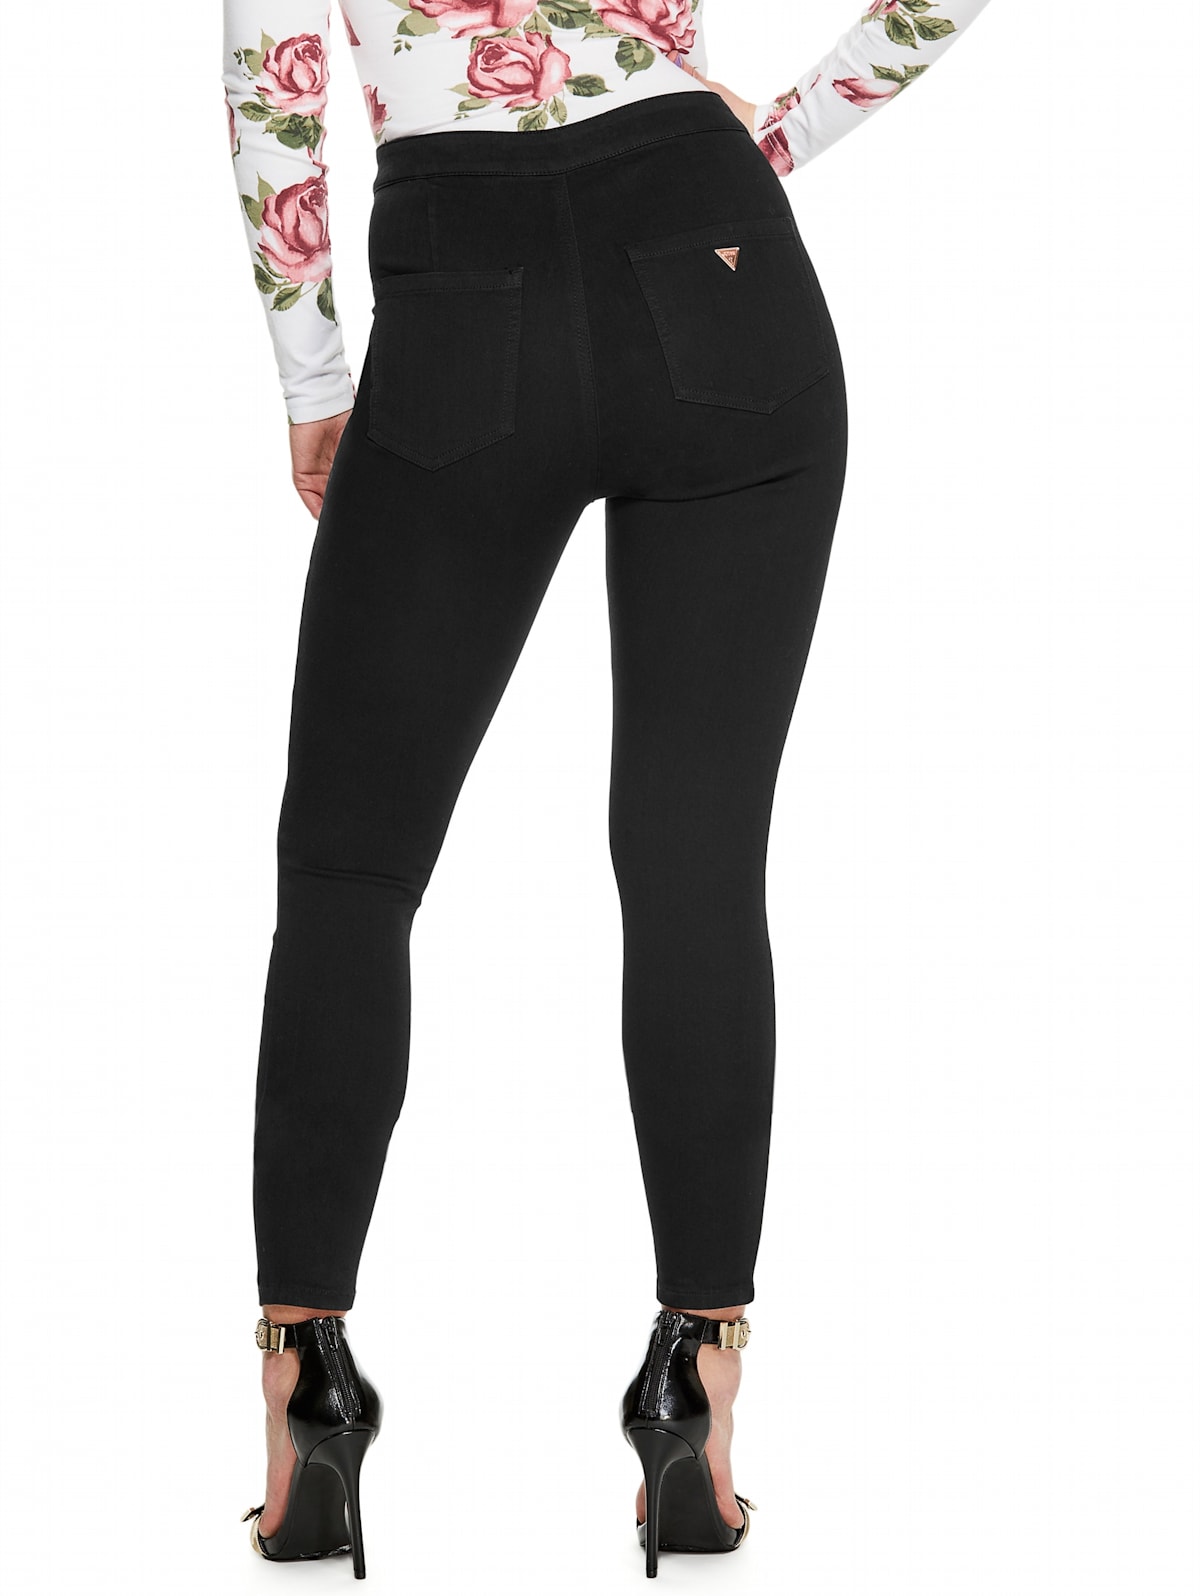 Blame lose yourself philosophy Eco Nova Super High-Rise Curvy Skinny Jeans | GUESS Factory Ca